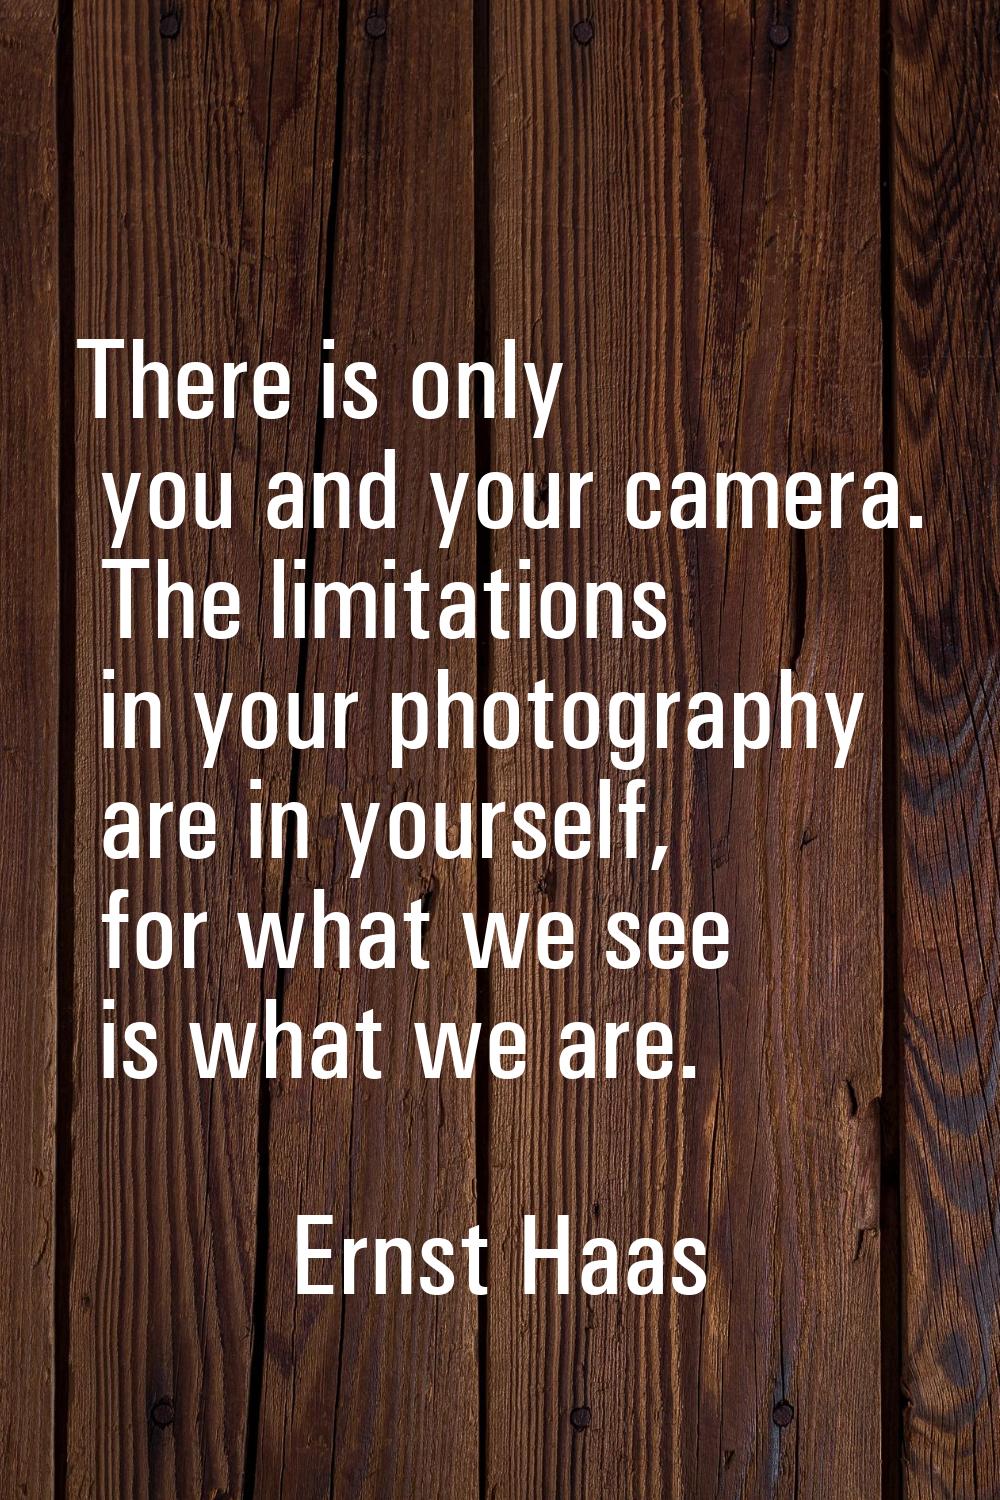 There is only you and your camera. The limitations in your photography are in yourself, for what we